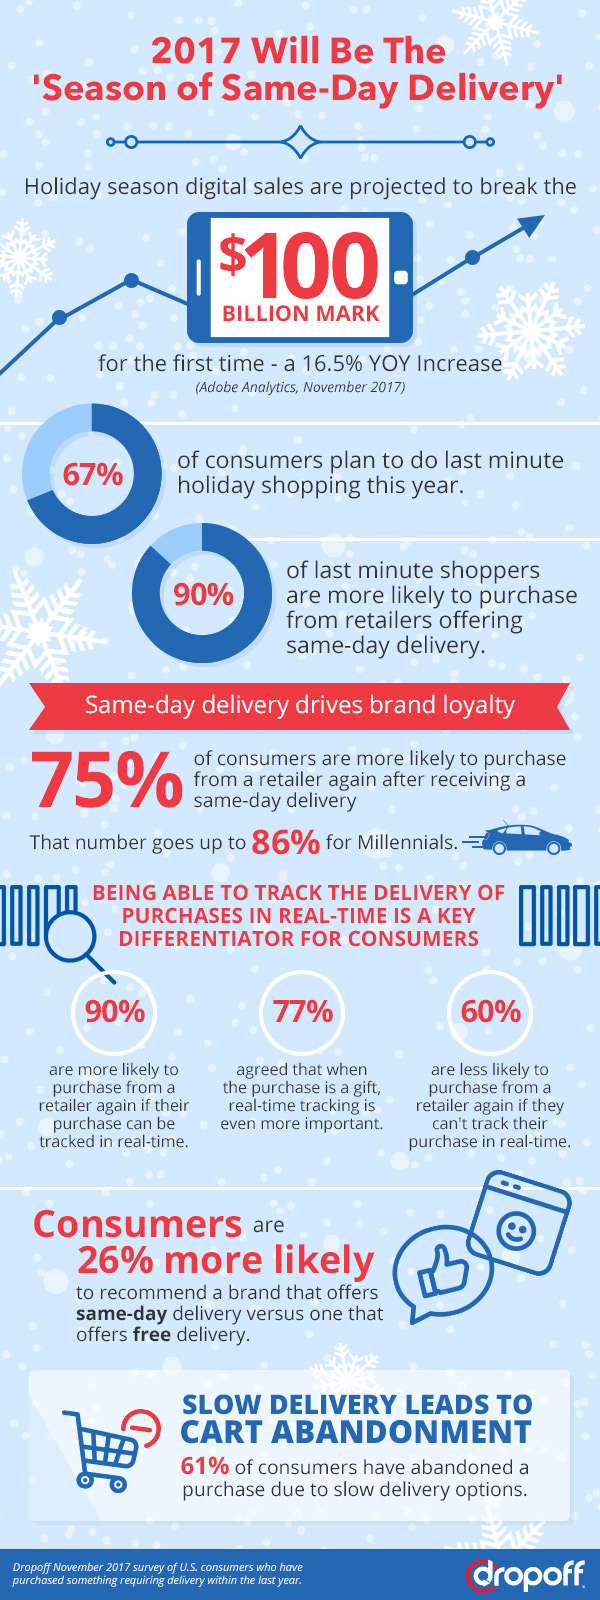 National Survey from Dropoff Indicates That 2017 Holiday Will Be the ‘Season of Same-Day Delivery’